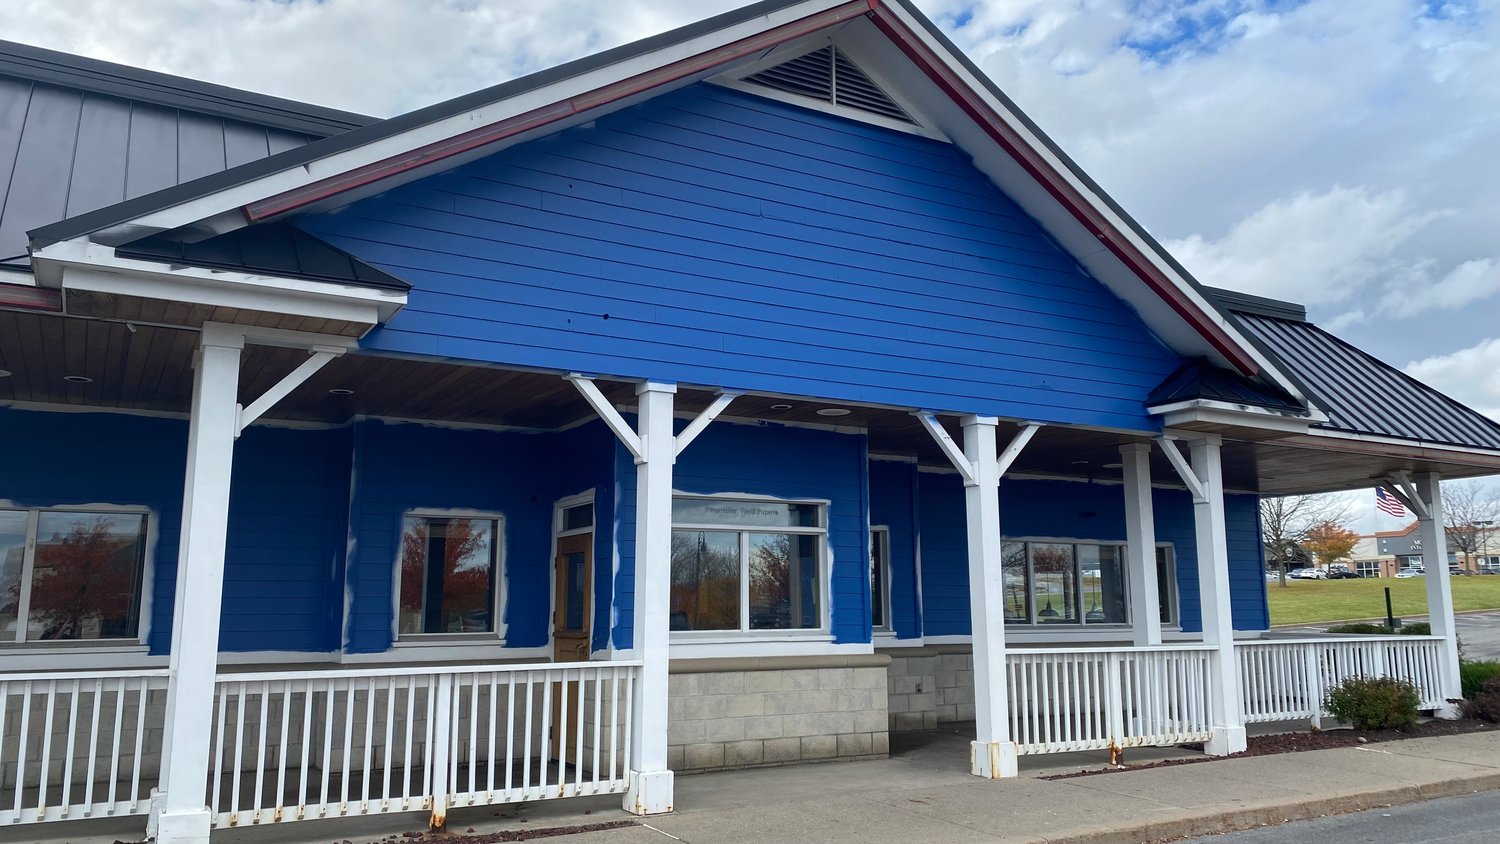 The former Outback Steakhouse building, 8655 Clinton St. in The Orchard, is currently receiving renovations, as plans are underway to establish a new restaurant.